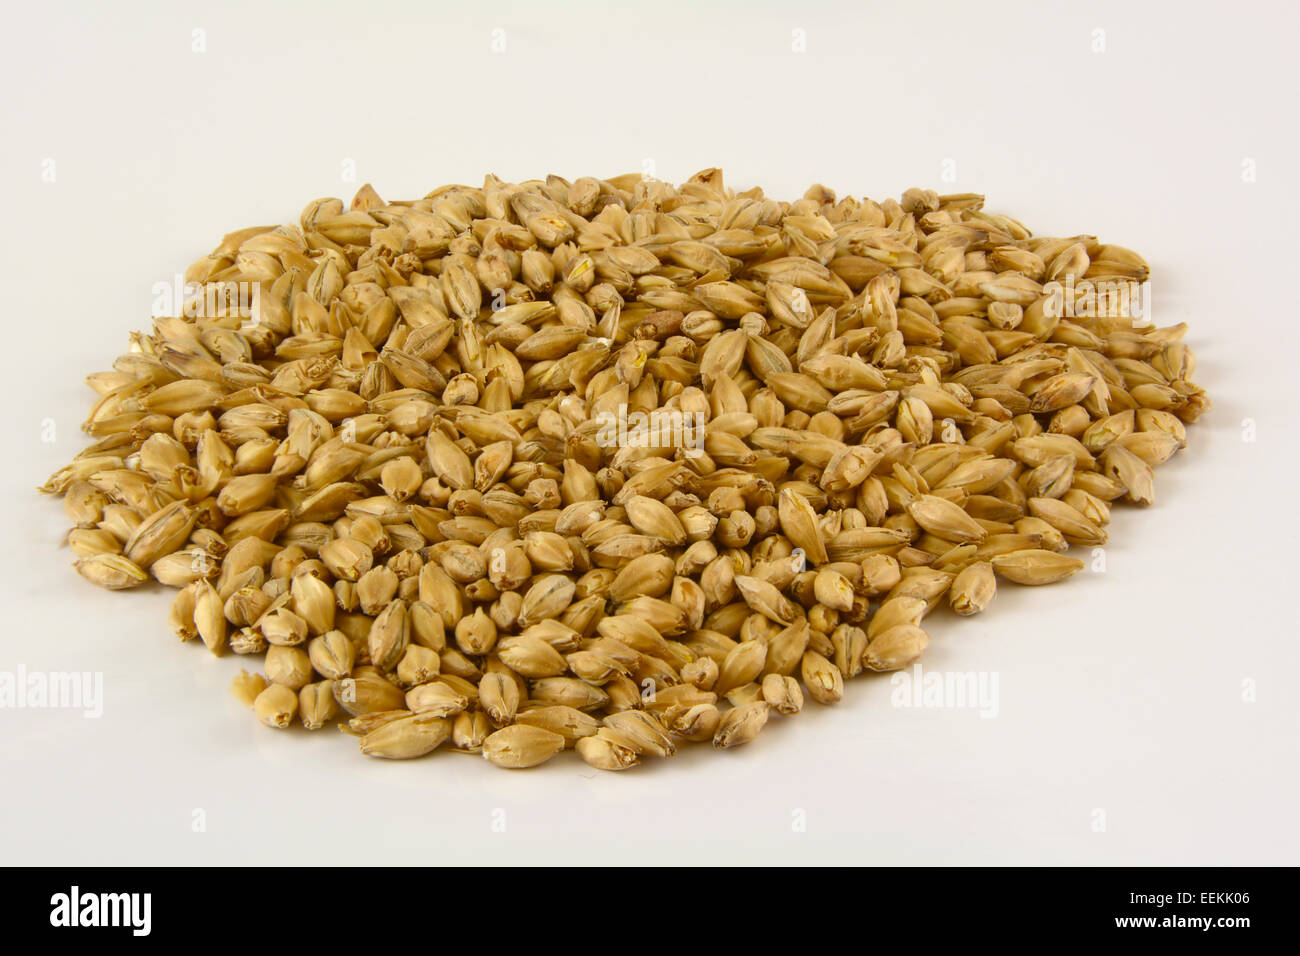 Barley prepared as 2 row malt used for preparing the mash for craft brewing beer, on a white background in the studio Stock Photo